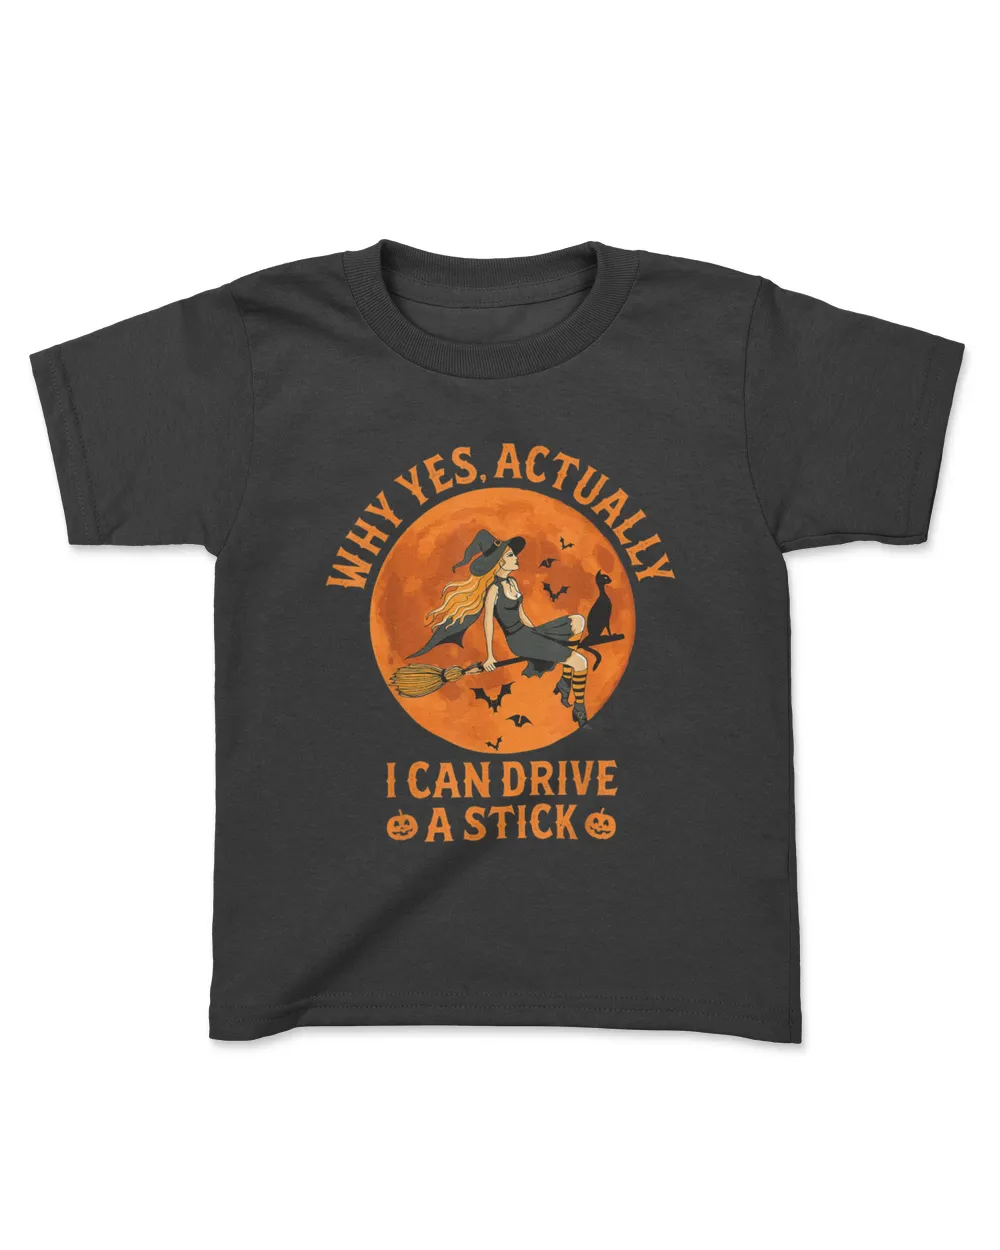 Why Yes Actually I Can Drive A Stick Funny Witch Costume